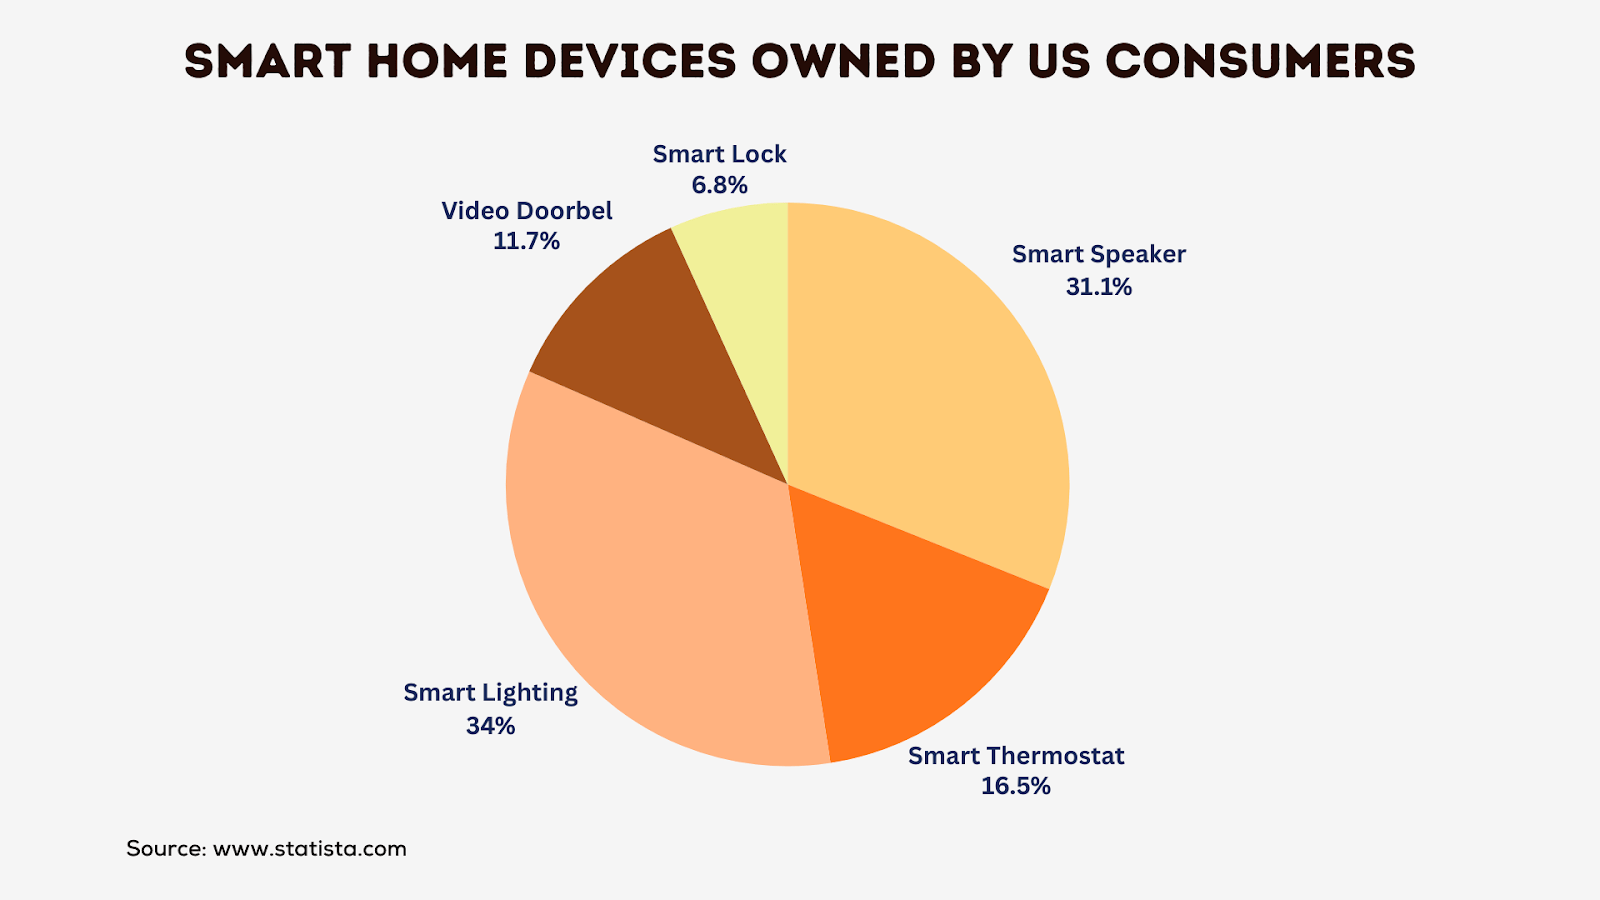 Smart Home Devices owned by US consumers